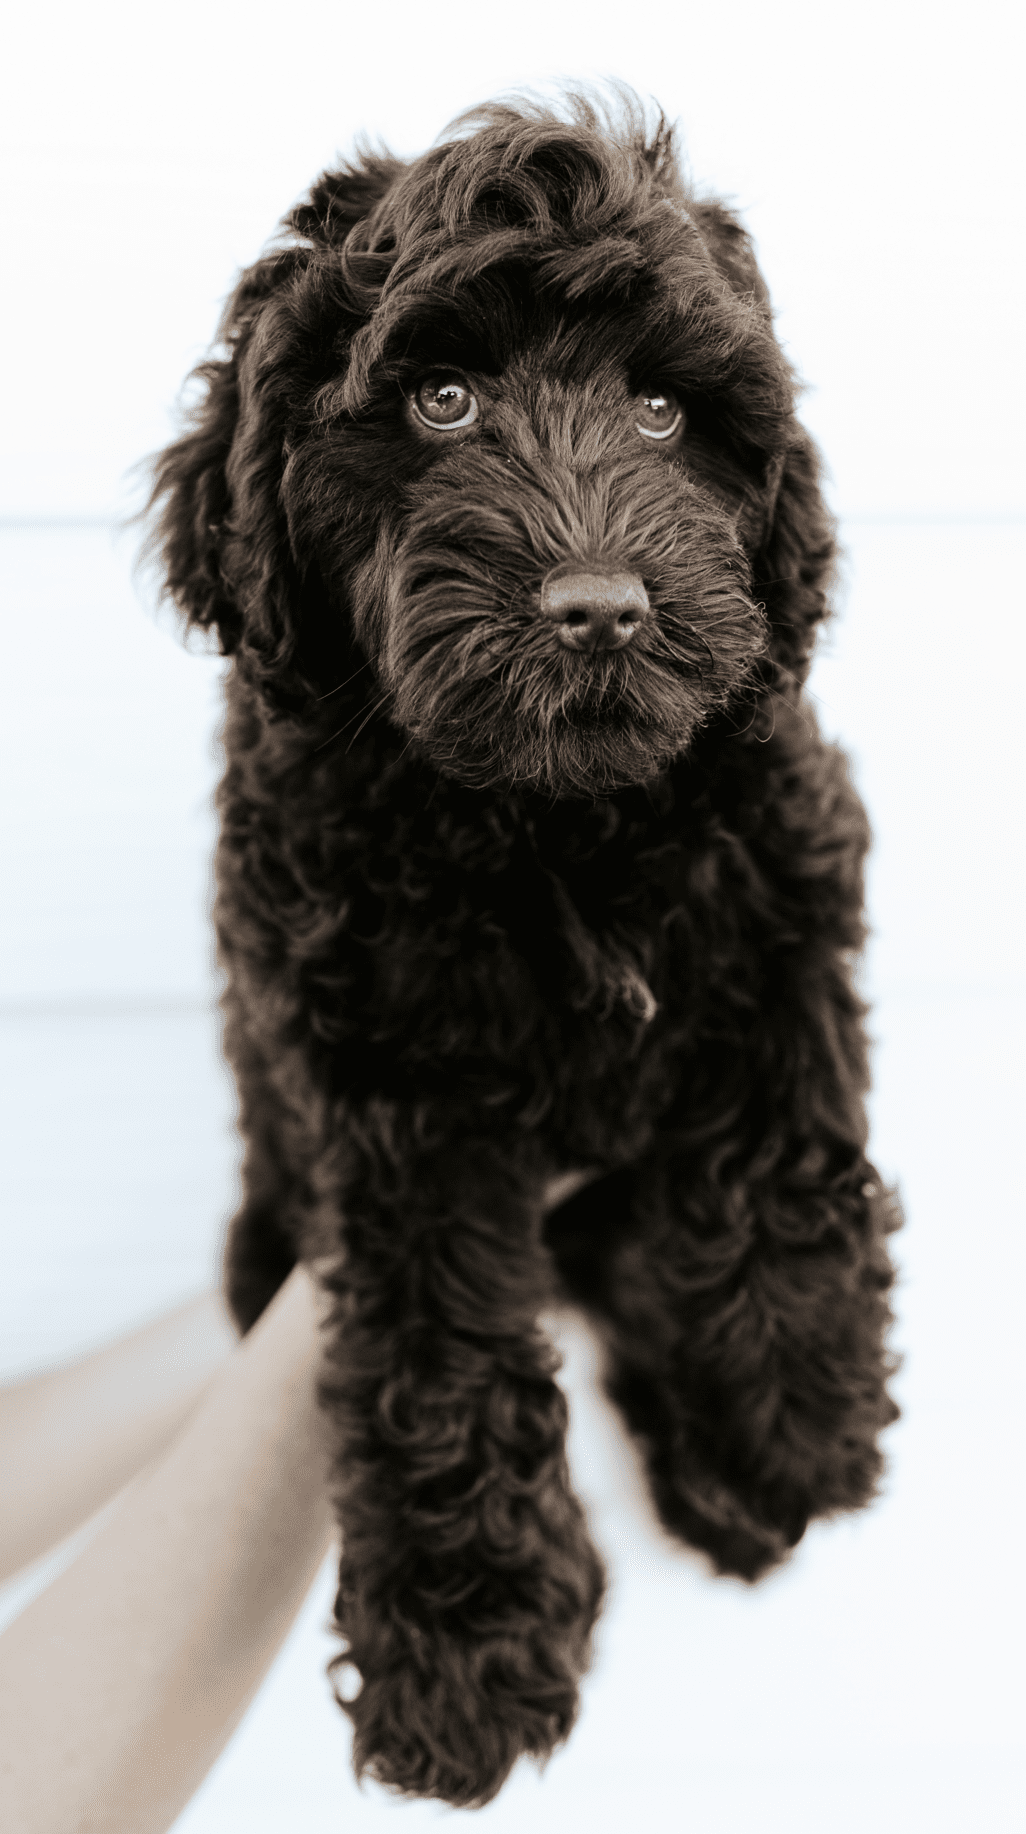 The Smeraglia Teddybear Goldendoodle is a beautiful black dog with a teddy bear-like face. They are allergy-friendly and make great pets.